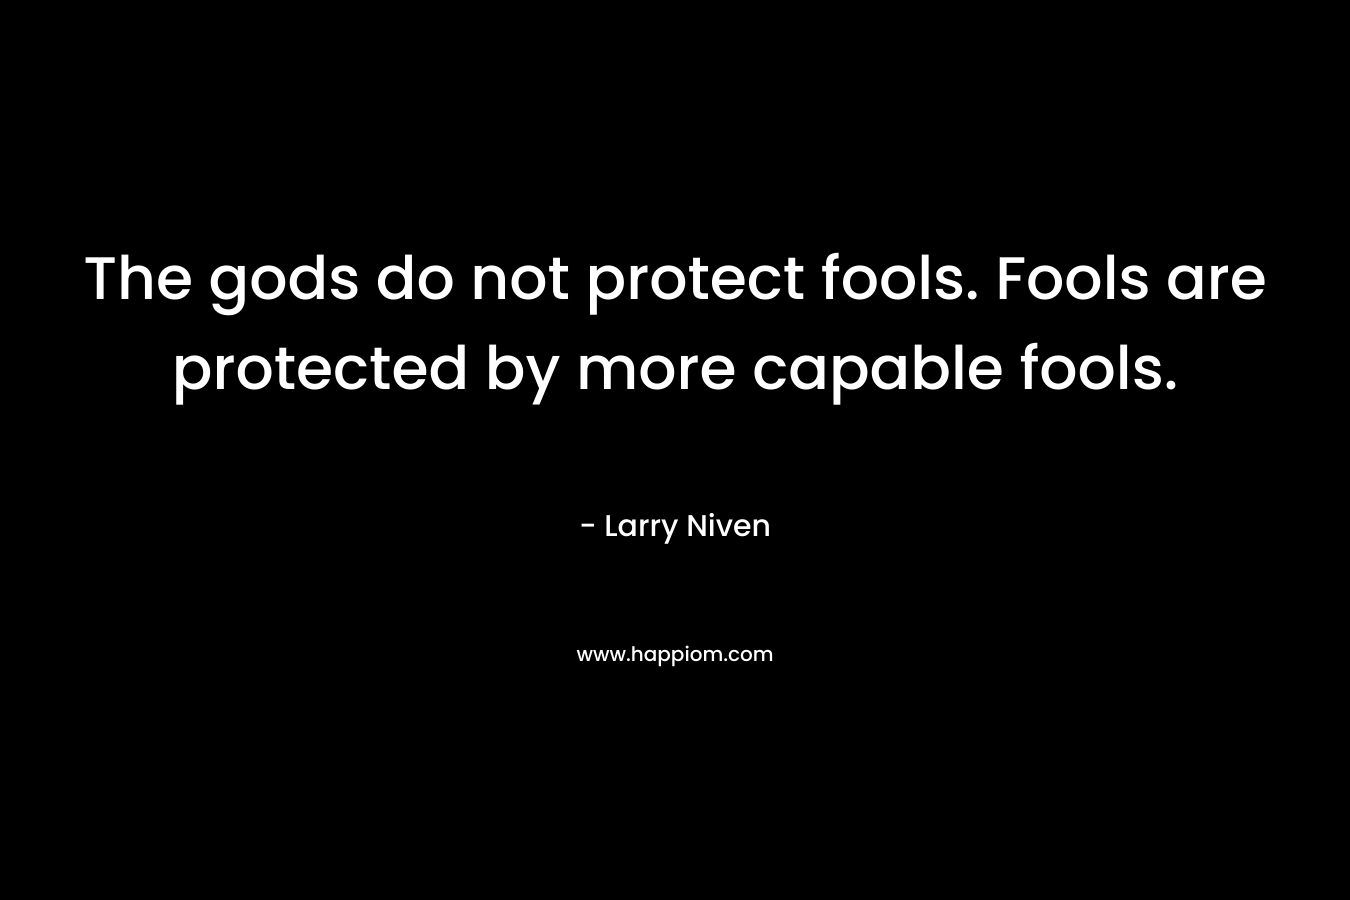 The gods do not protect fools. Fools are protected by more capable fools.